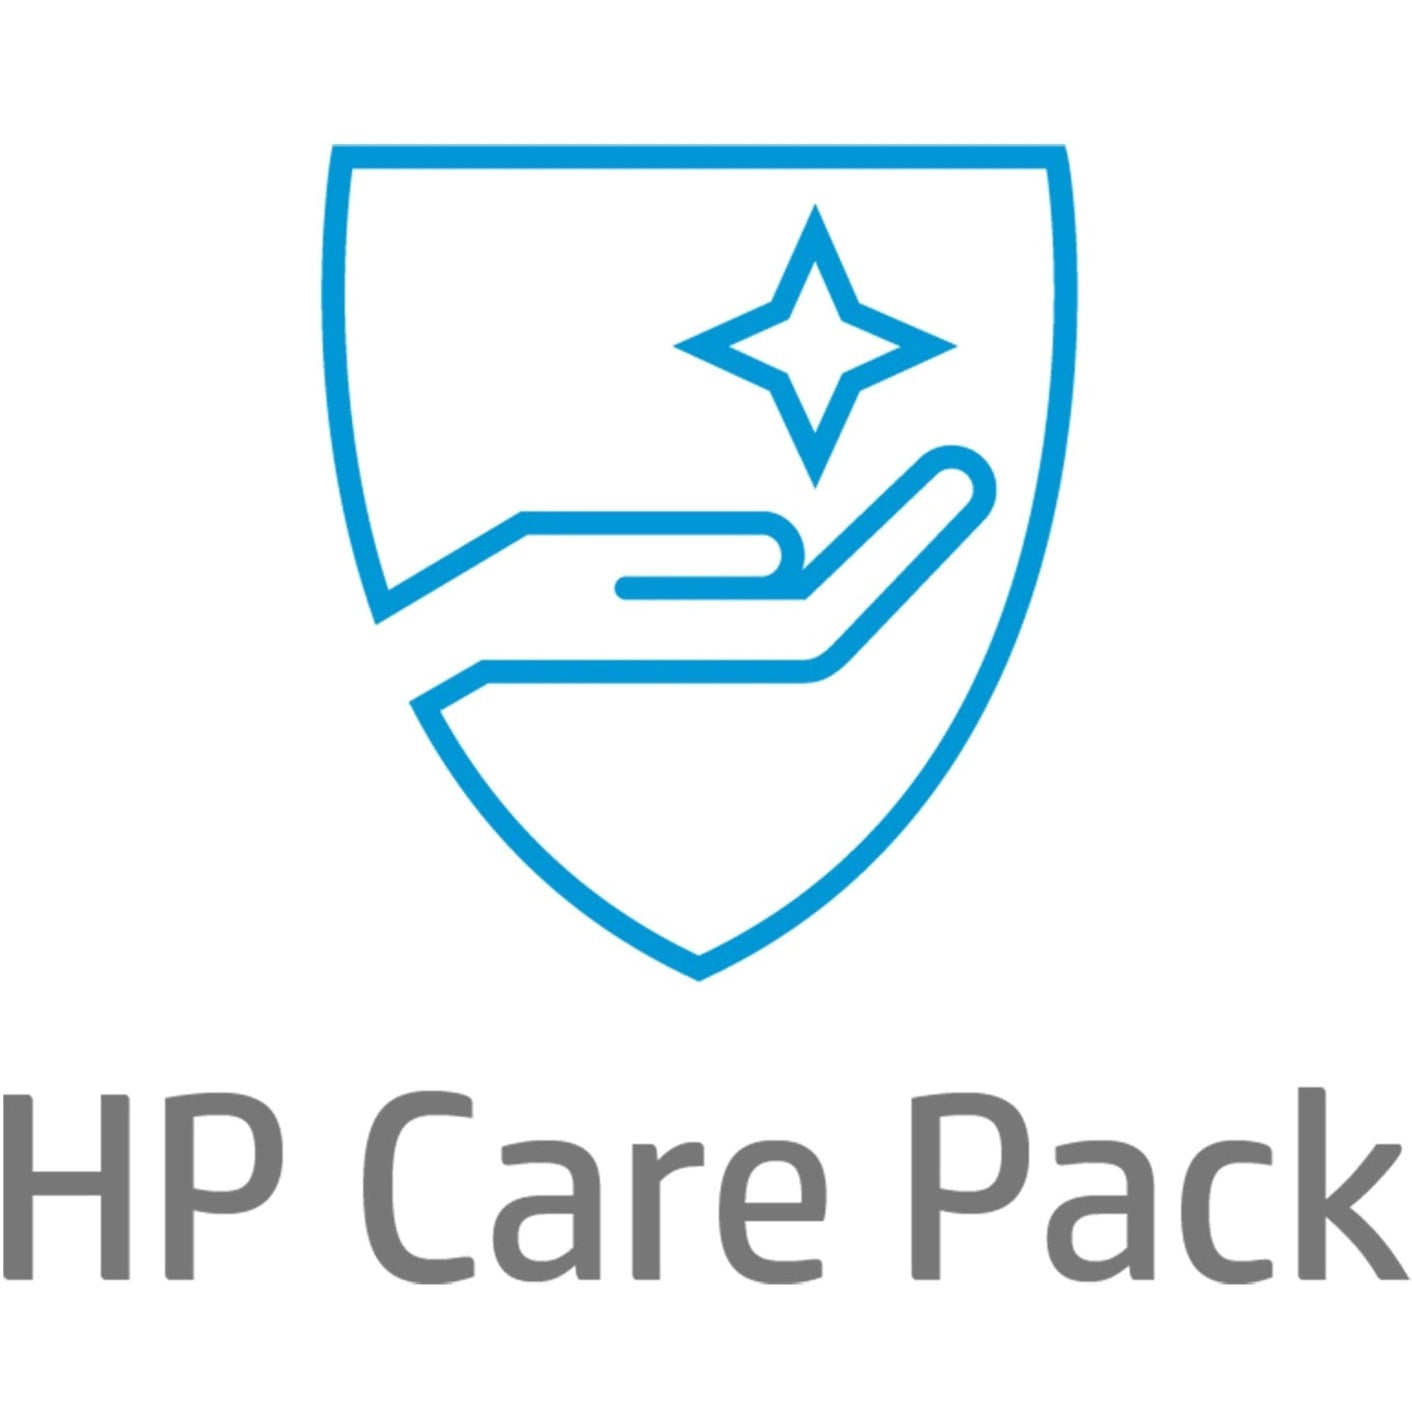 HP Care Pack - Extended Service - 3 Year - Service (UL657E)